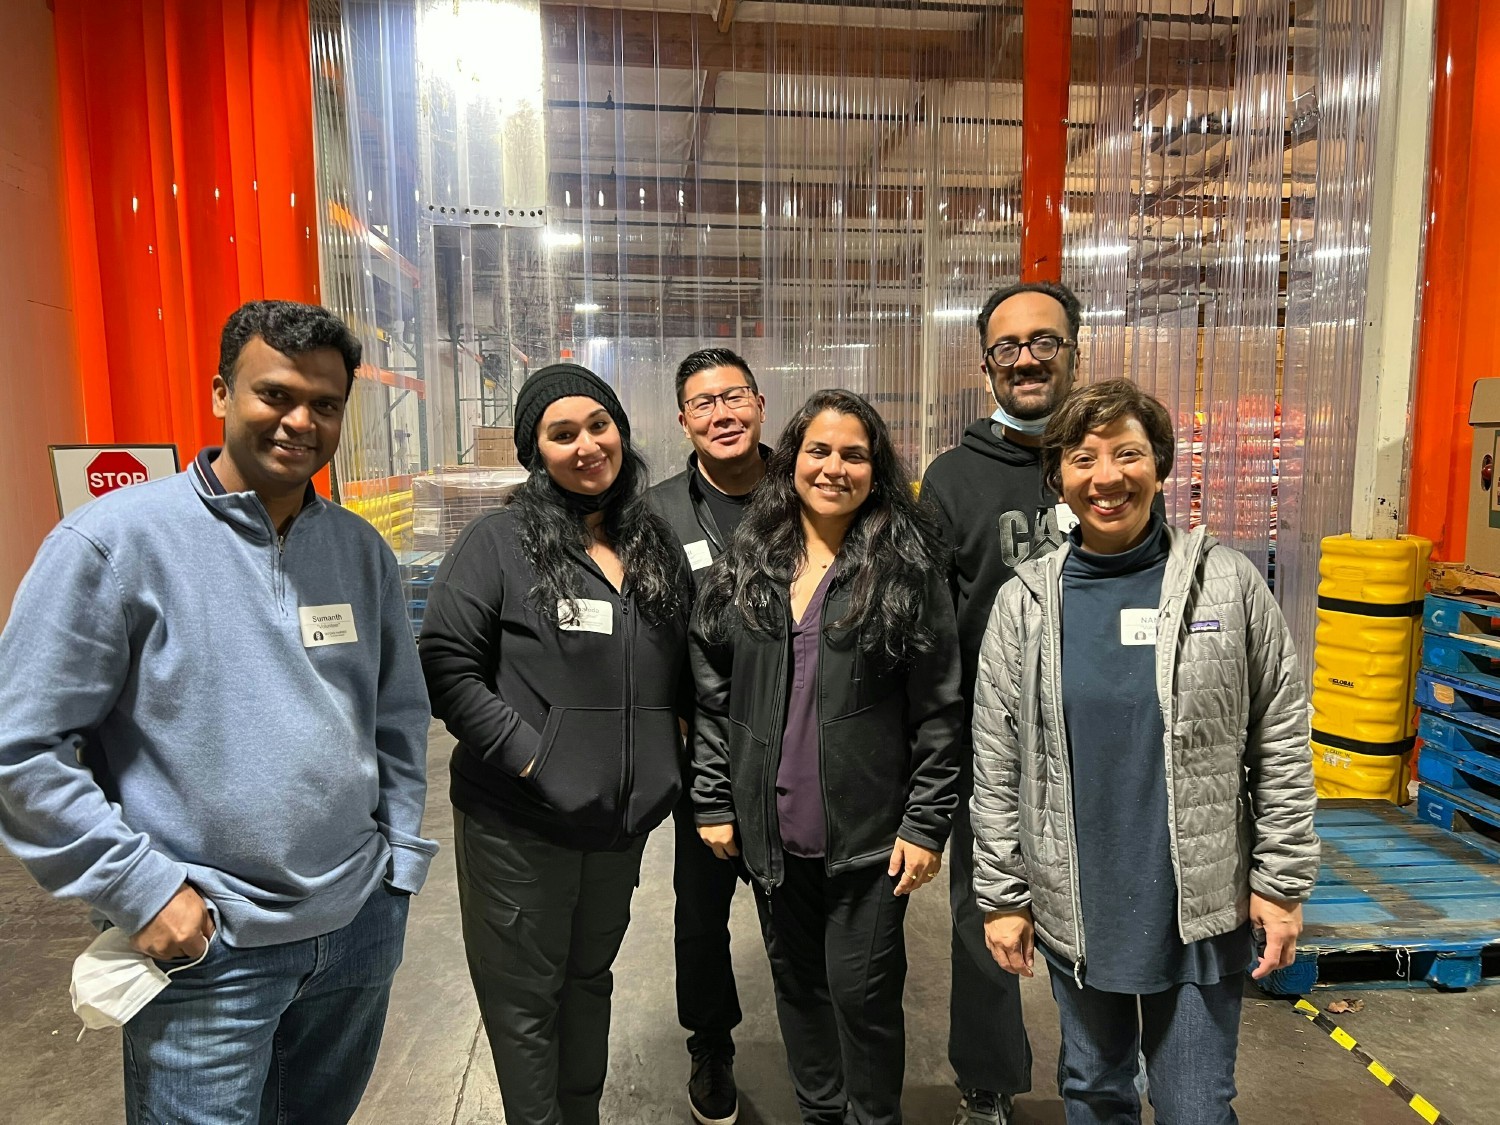 Employees volunteered at a food bank near San Francisco, California in honor of Martin Luther King Jr. Day